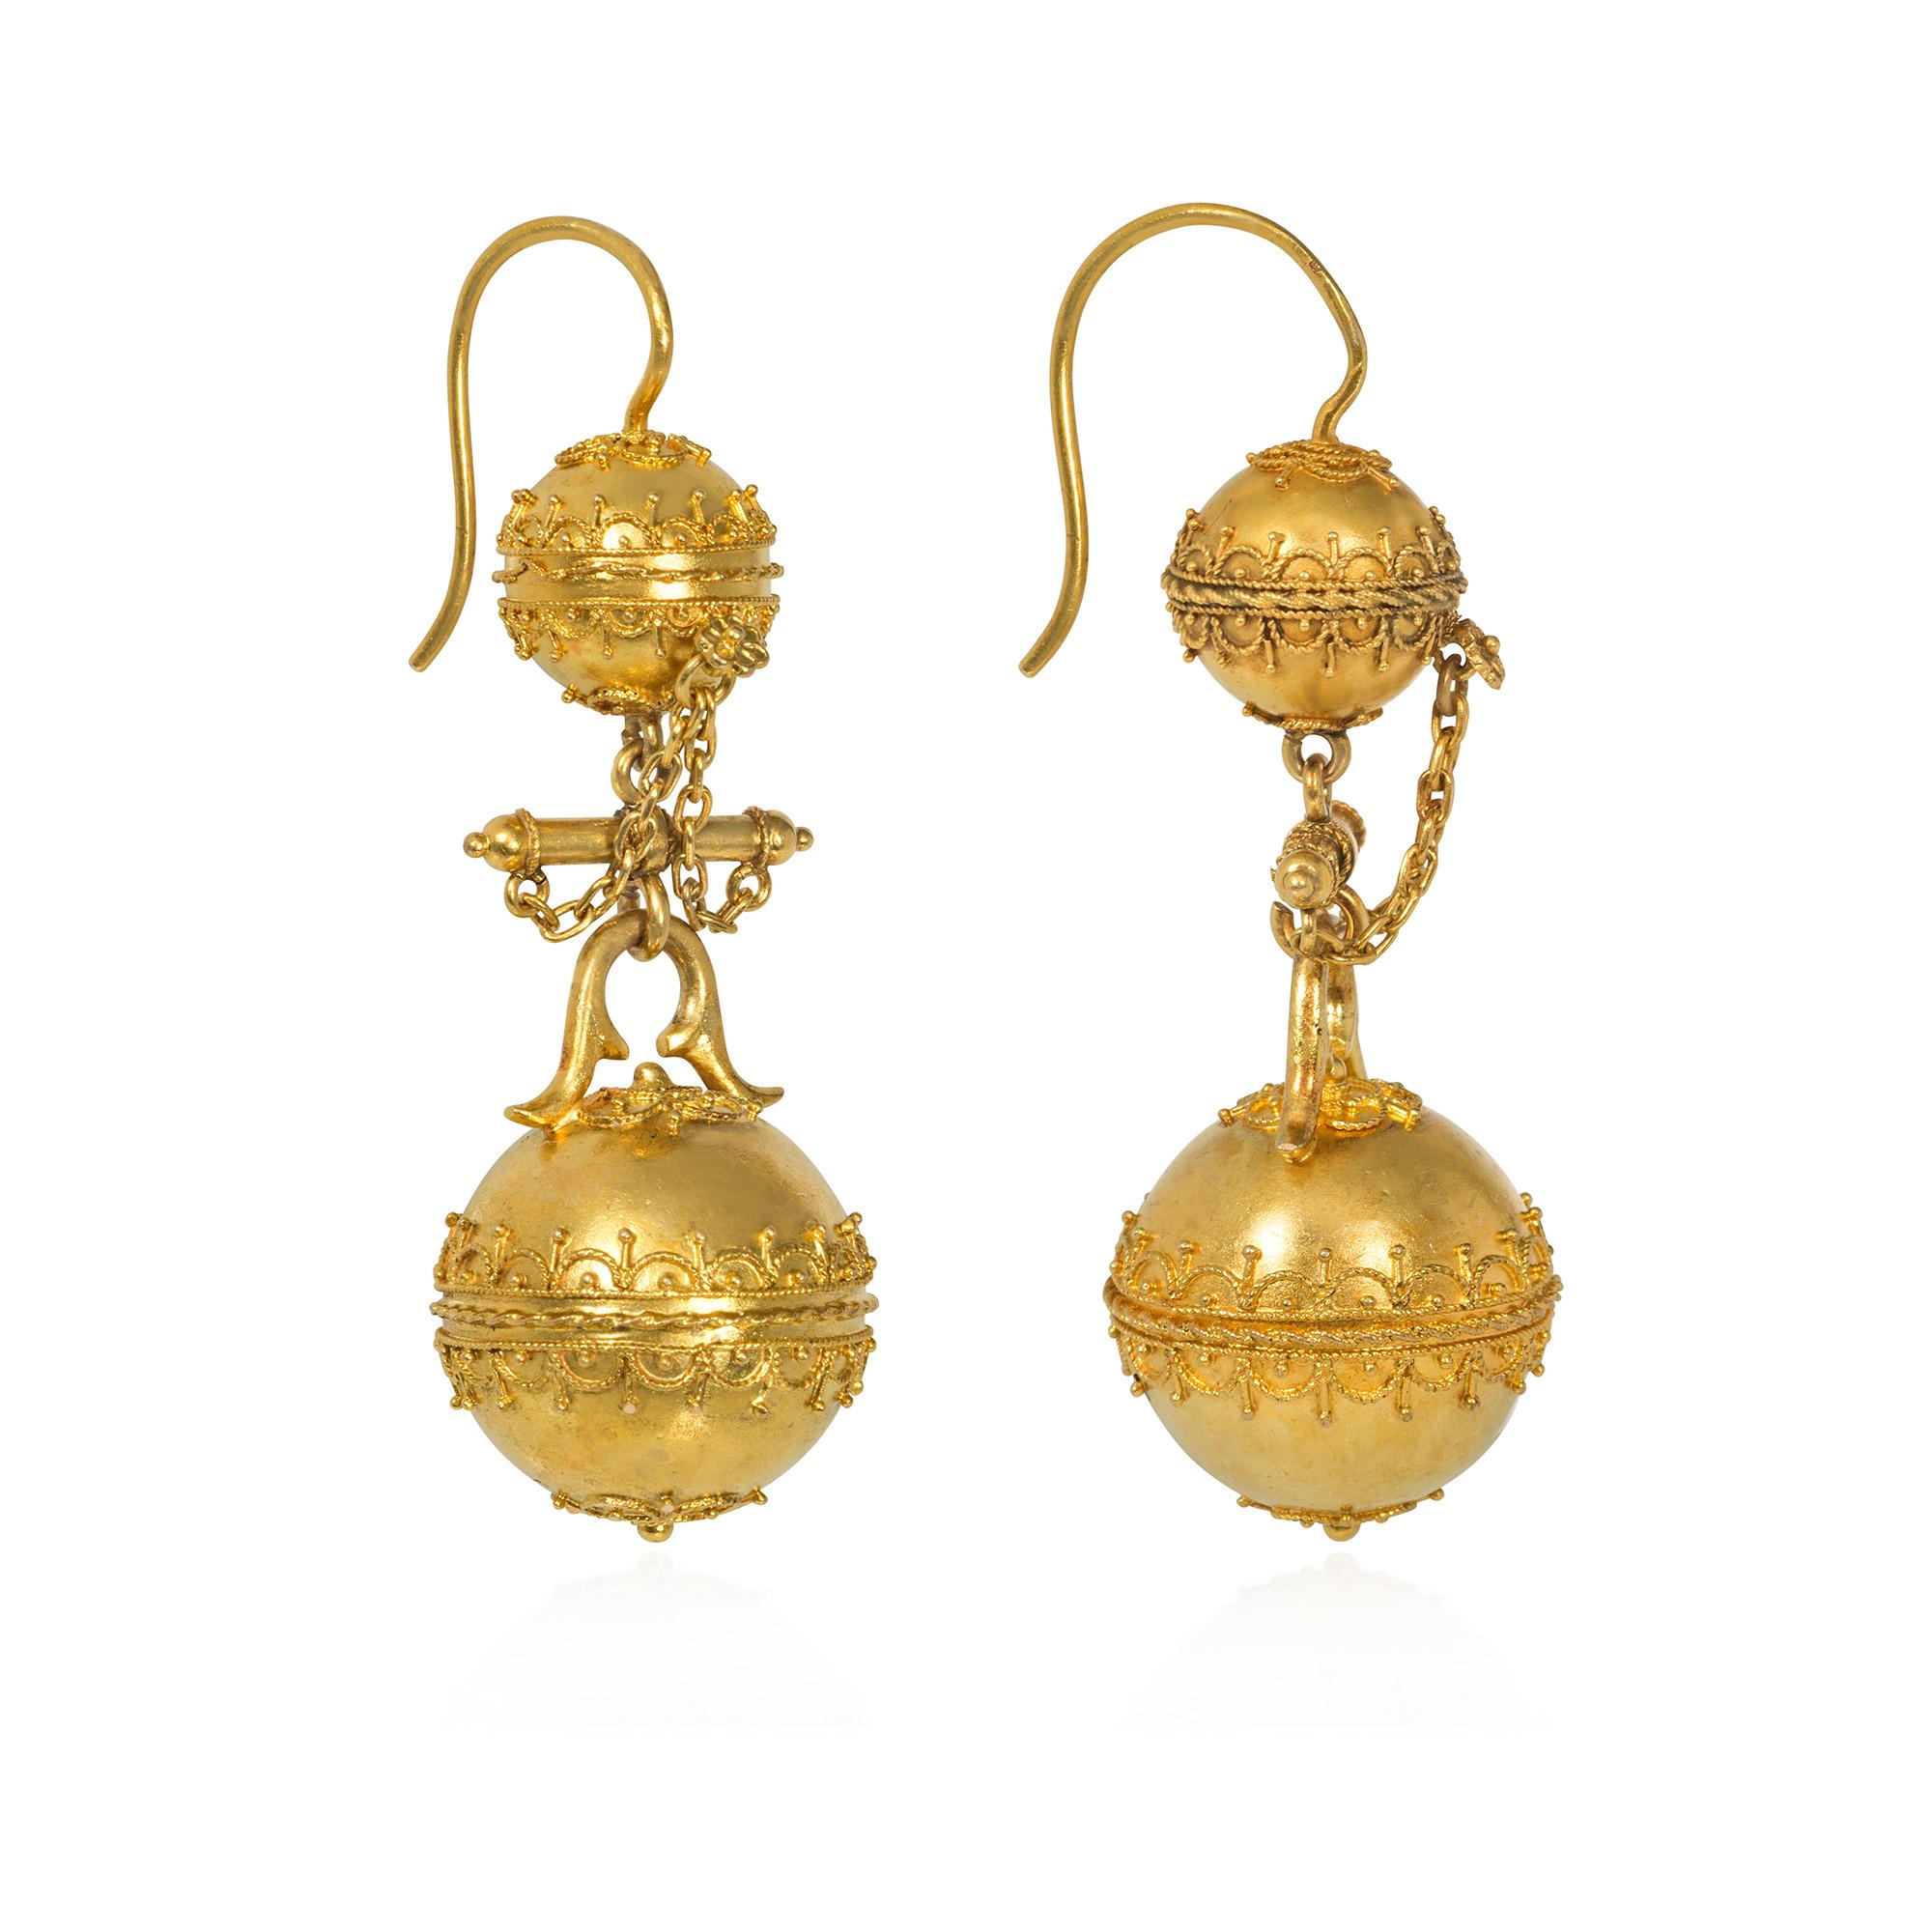 A pair of antique Victorian period gold pendant earrings in the Etruscan Revival style, comprised of gold beads with applied wirework and granulation suspended from similar bead surmounts with a baton spacer and chain decoration, in